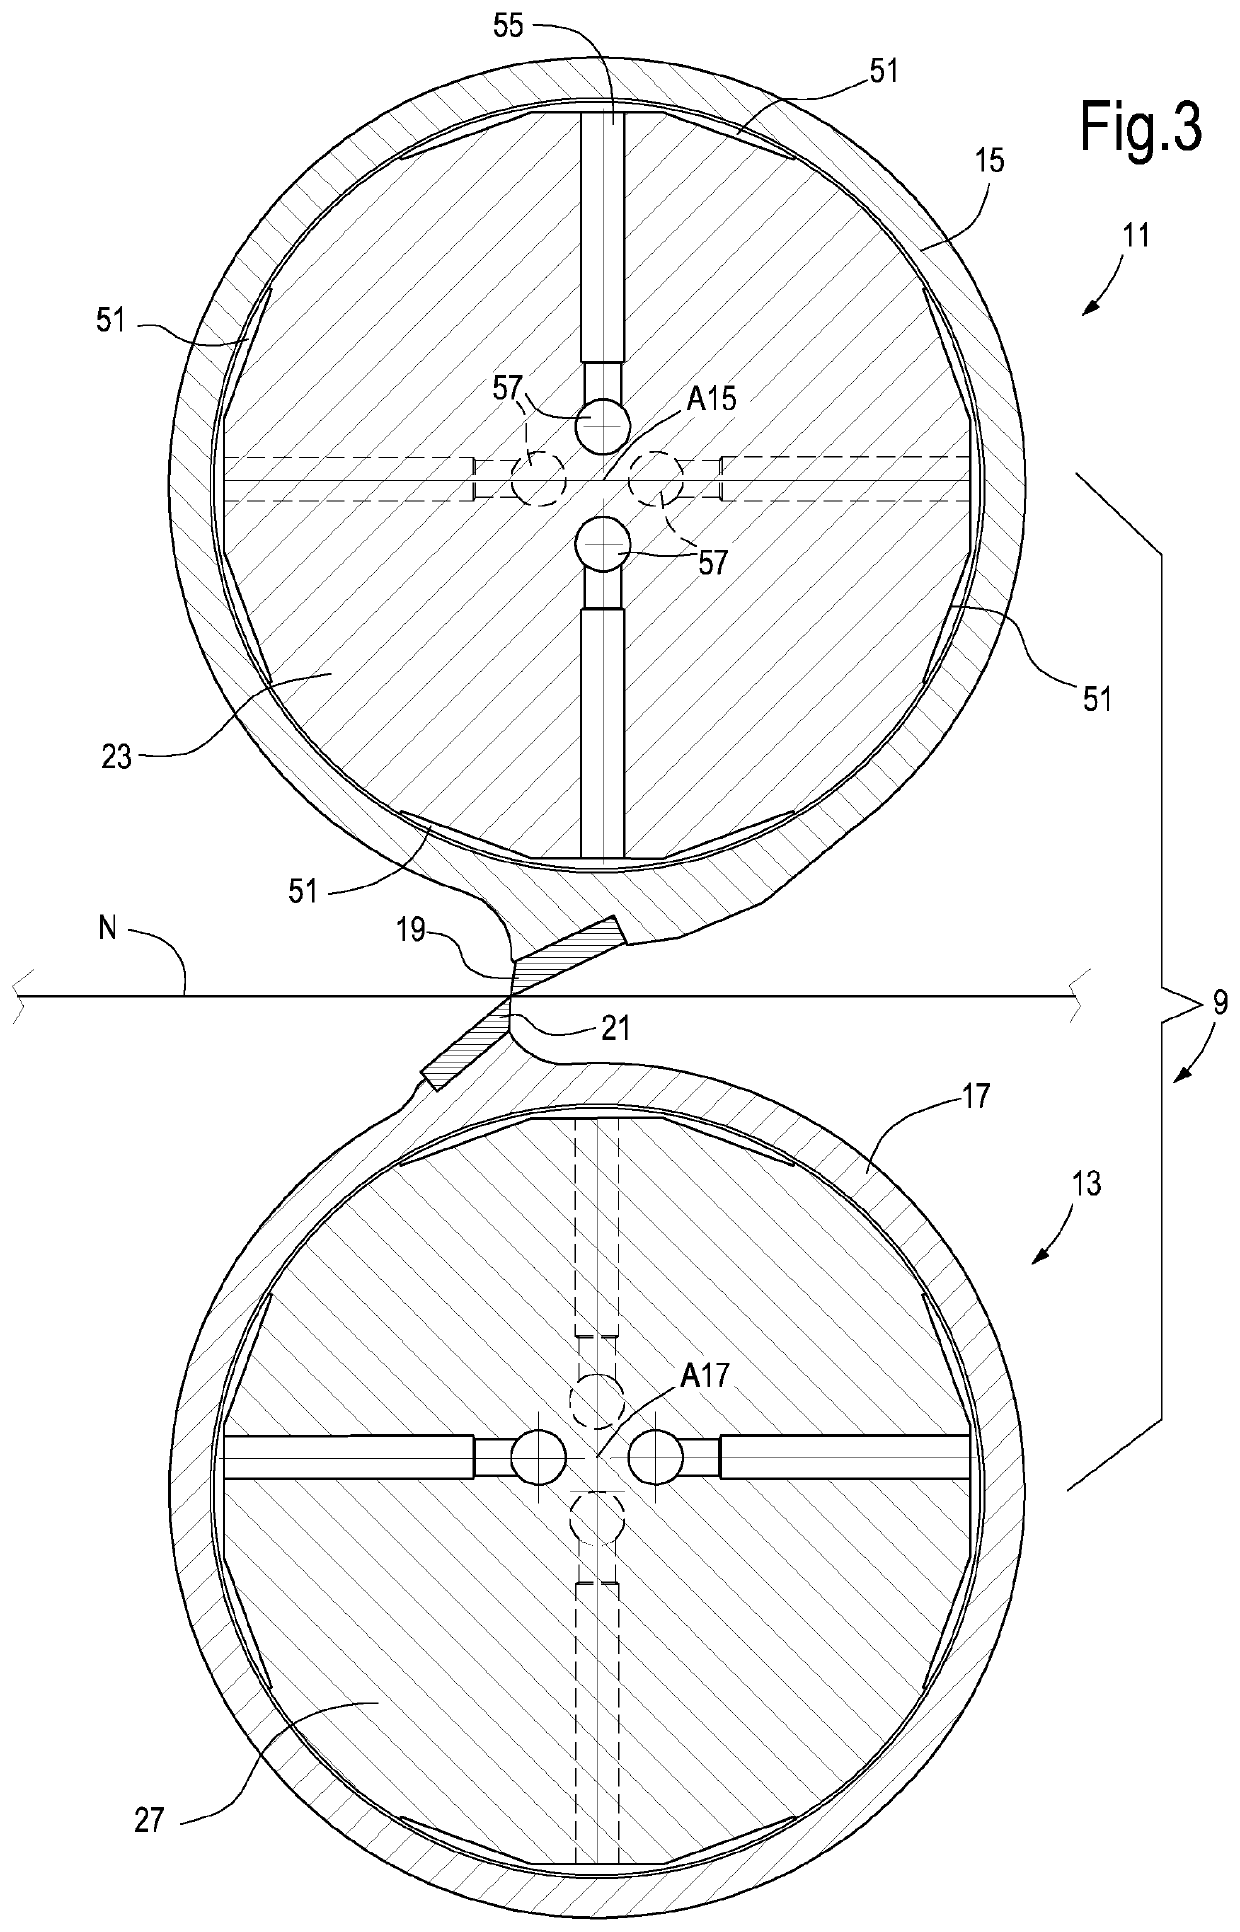 Device for transverse cutting of a web material and machine containing said device